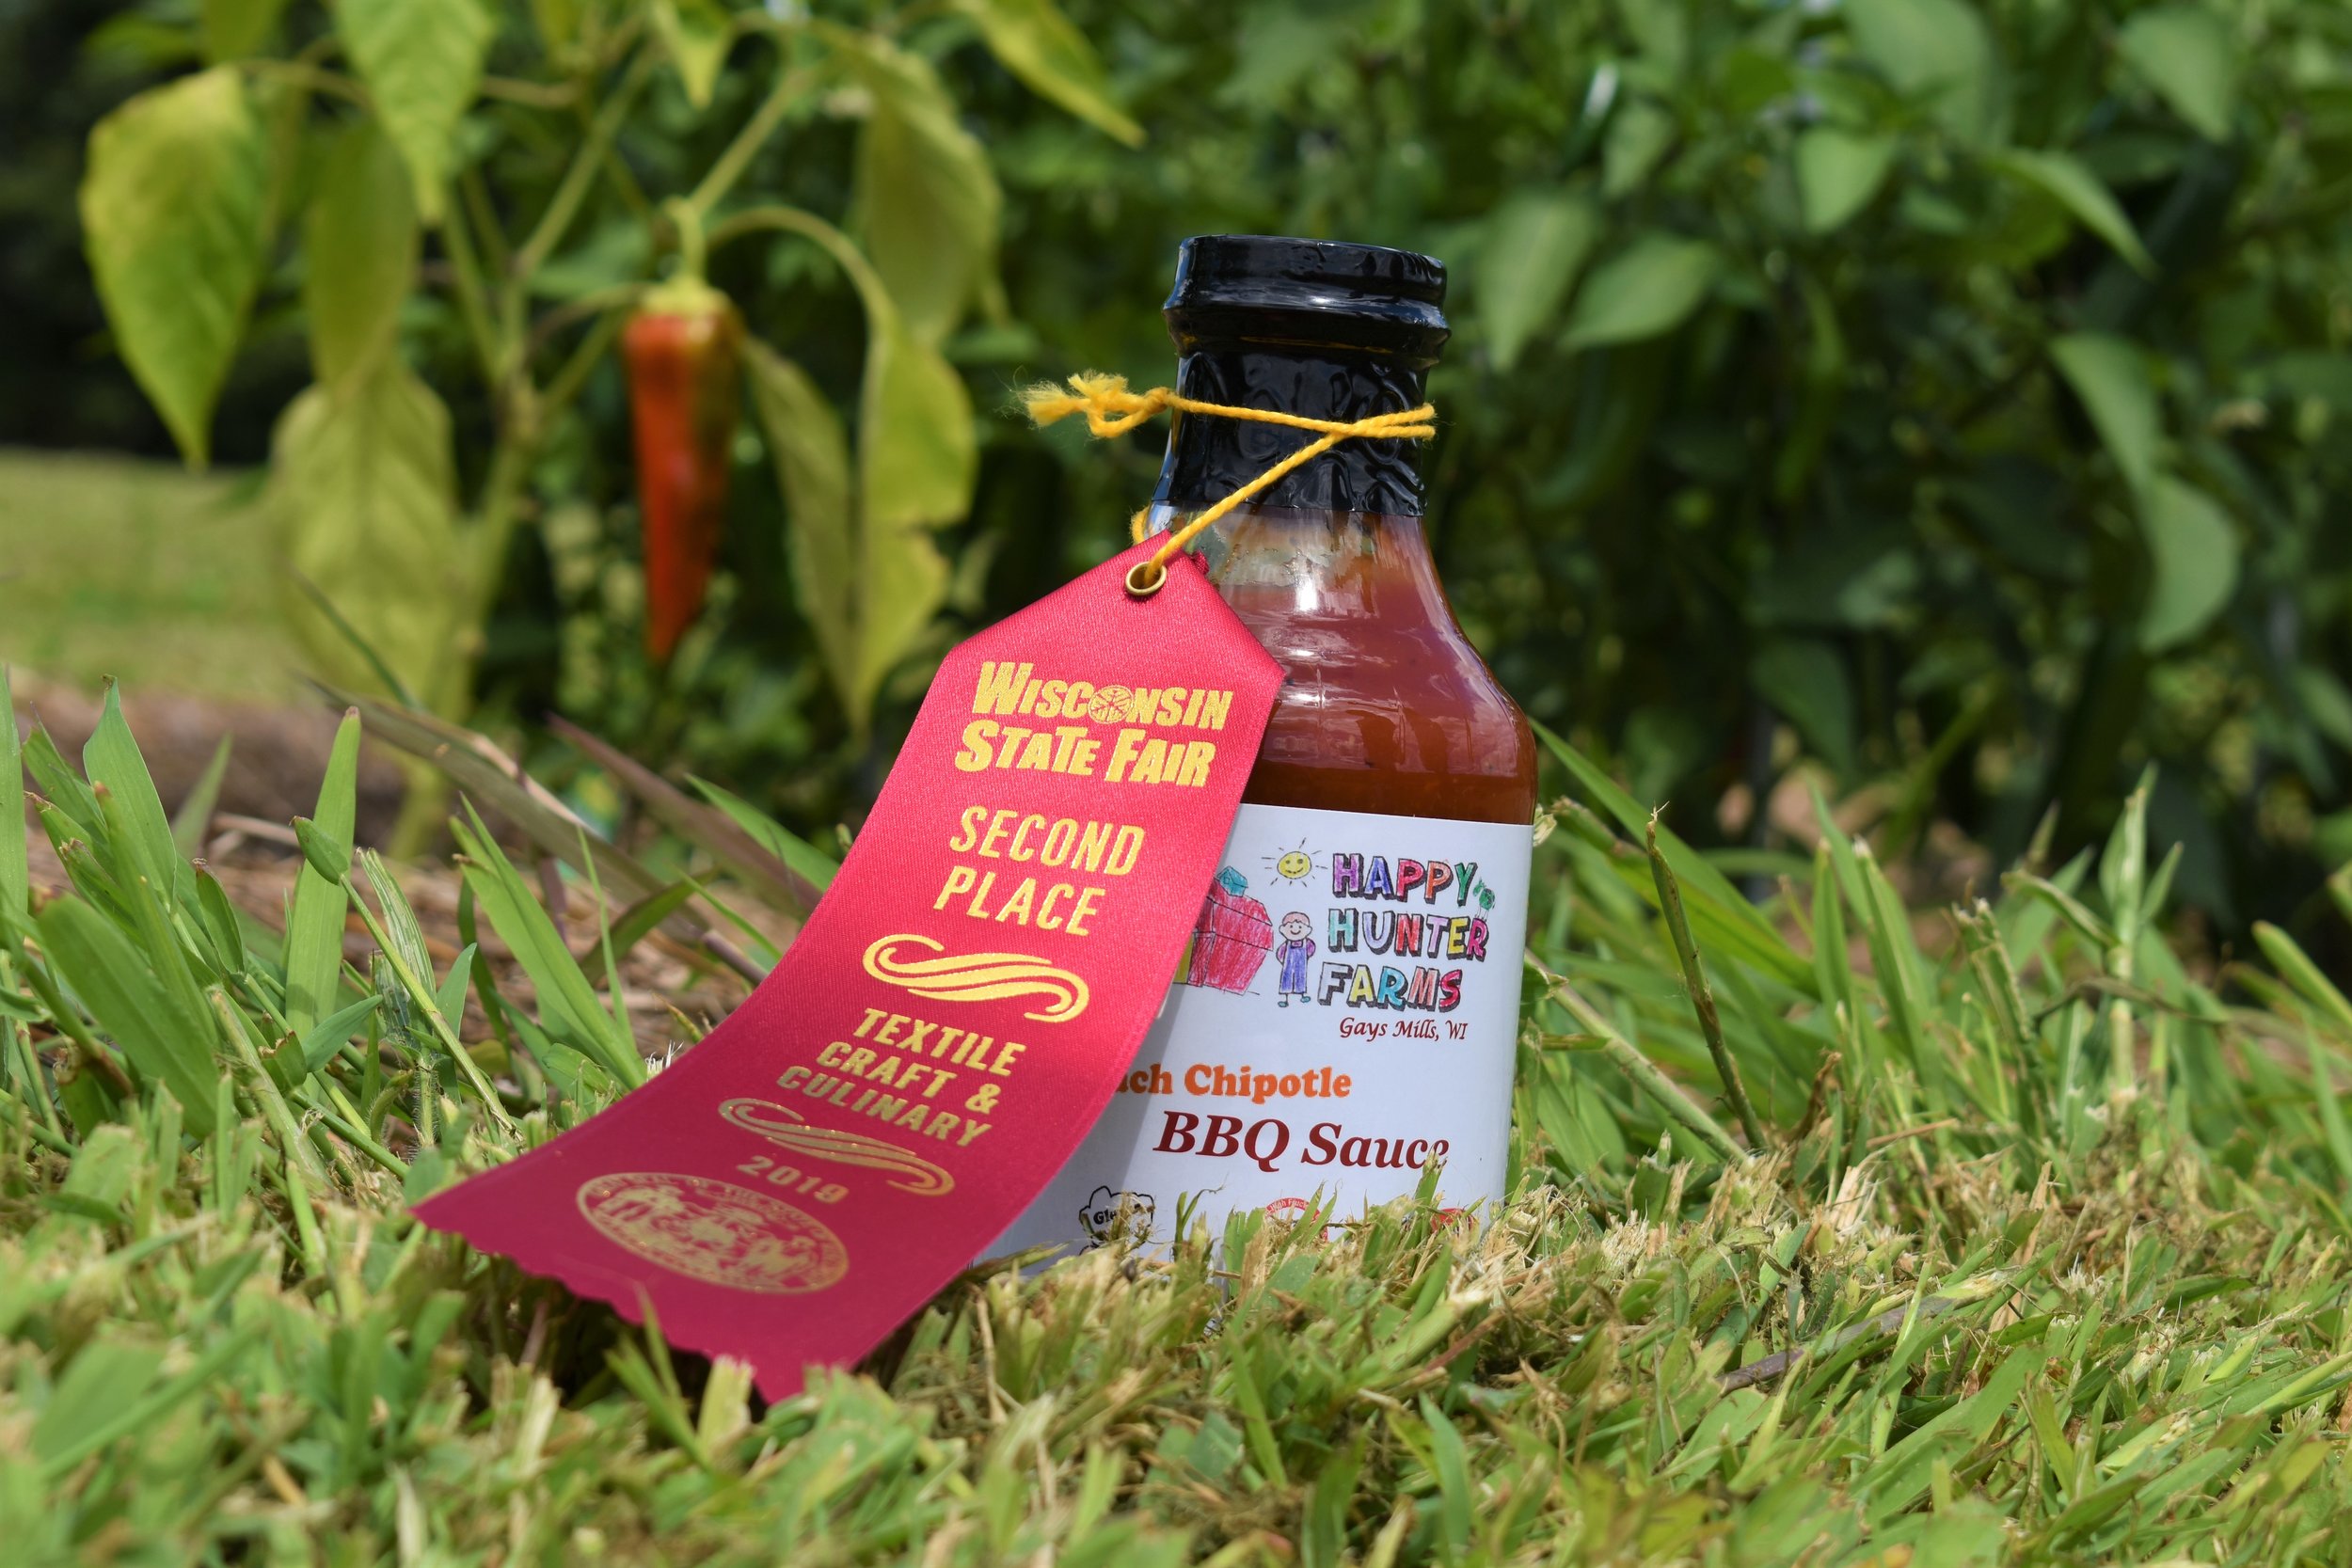  Happy Hunter Farms’ 2019 Wisconsin State Fair second place winning Peach Chipotle BBQ Sauce 